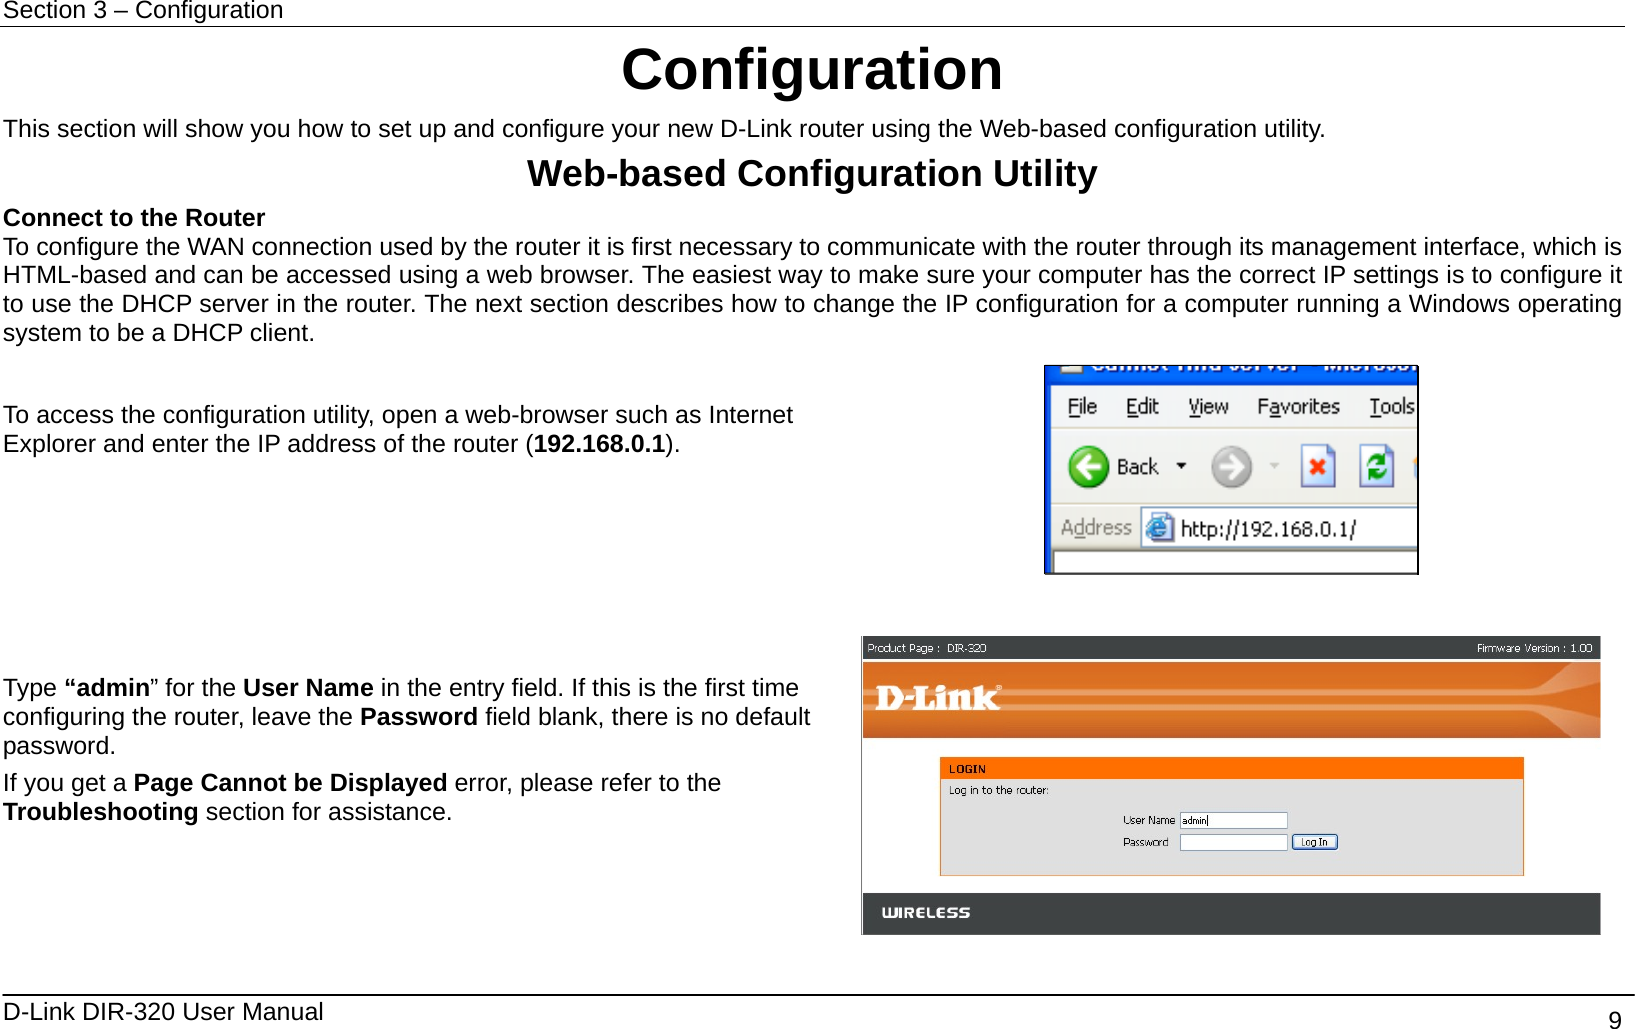 Section 3 – Configuration   D-Link DIR-320 User Manual                                       9 Configuration This section will show you how to set up and configure your new D-Link router using the Web-based configuration utility. Web-based Configuration Utility Connect to the Router   To configure the WAN connection used by the router it is first necessary to communicate with the router through its management interface, which is HTML-based and can be accessed using a web browser. The easiest way to make sure your computer has the correct IP settings is to configure it to use the DHCP server in the router. The next section describes how to change the IP configuration for a computer running a Windows operating system to be a DHCP client.  To access the configuration utility, open a web-browser such as Internet Explorer and enter the IP address of the router (192.168.0.1).      Type “admin” for the User Name in the entry field. If this is the first time configuring the router, leave the Password field blank, there is no default password. If you get a Page Cannot be Displayed error, please refer to the Troubleshooting section for assistance.  